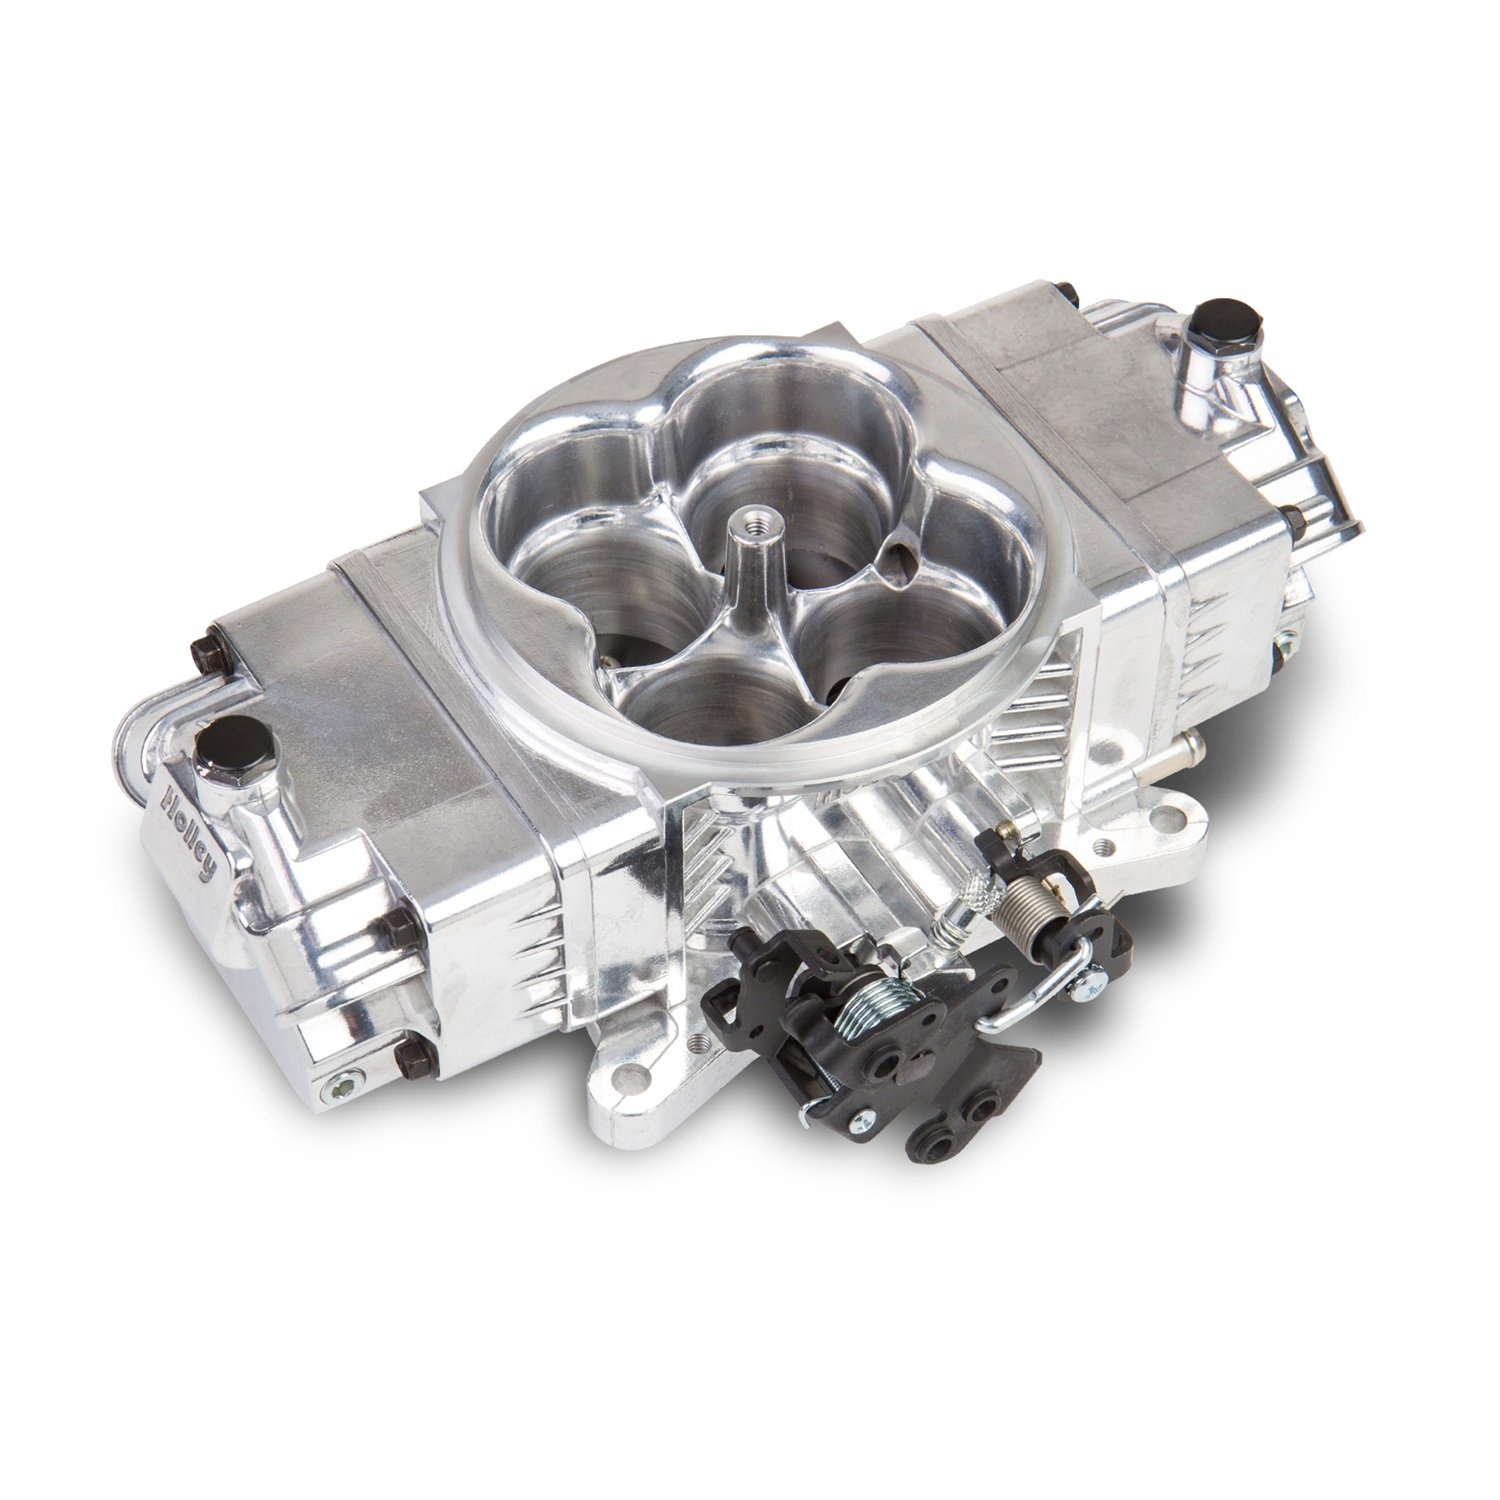 Terminator Stealth EFI Replacement 4bbl Throttle Body